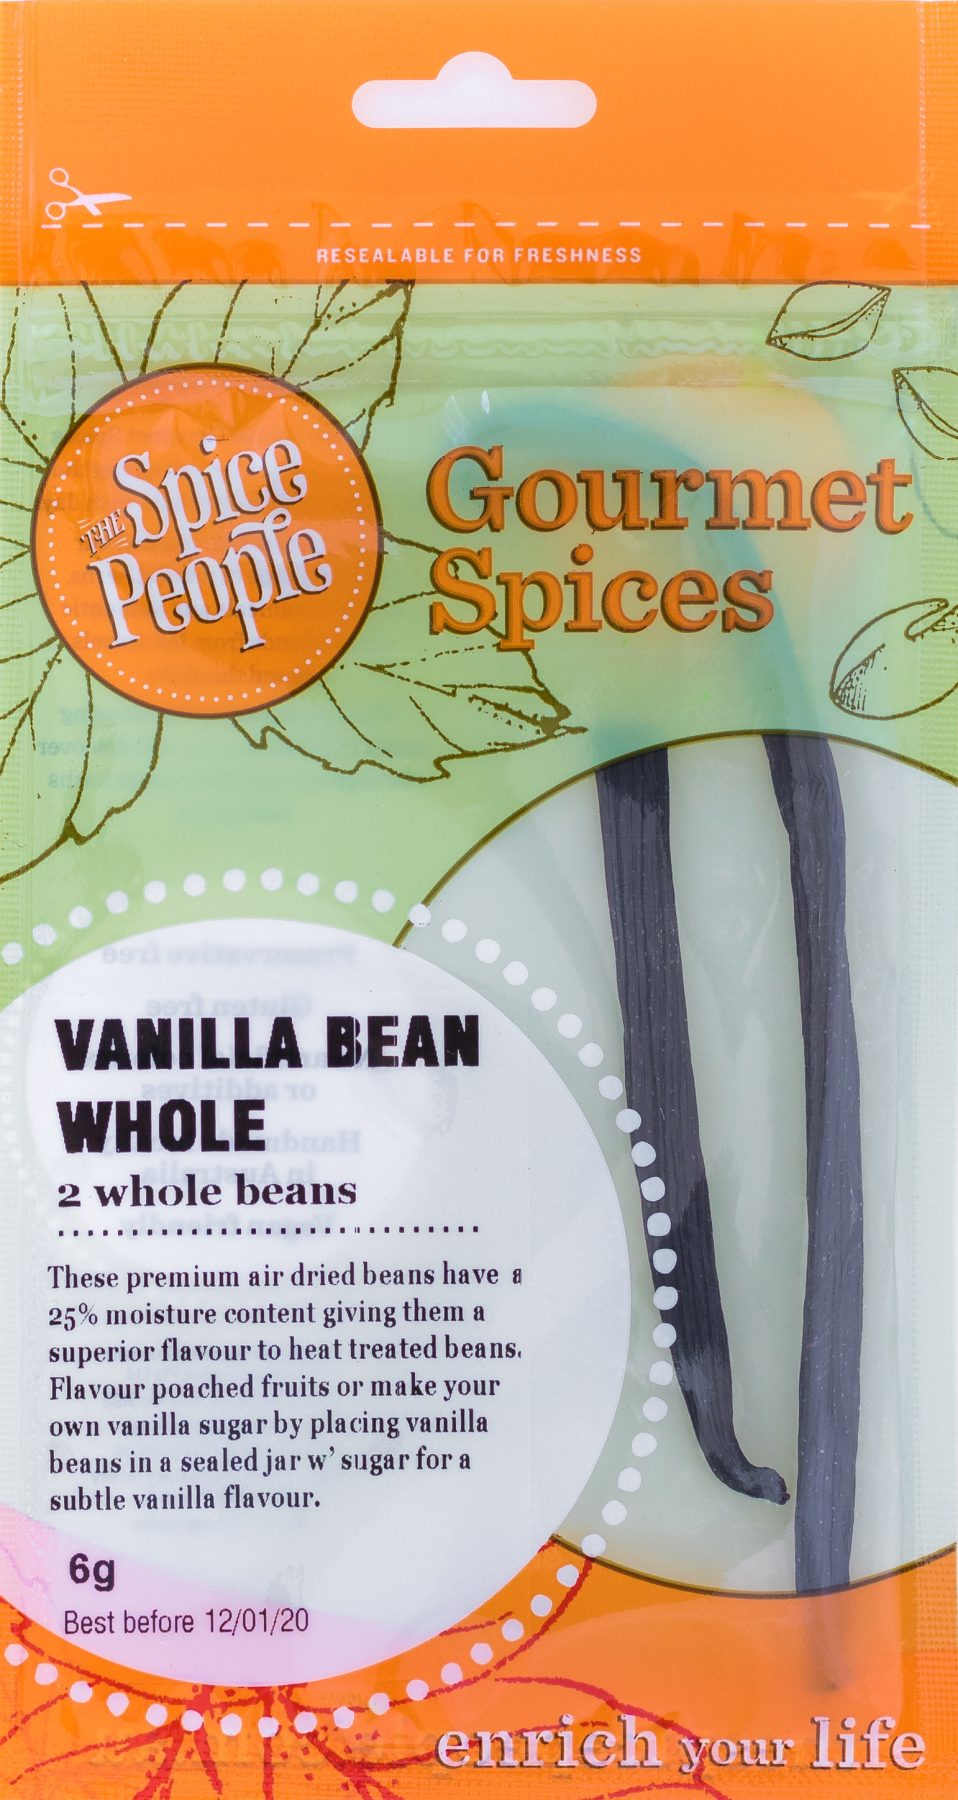 The Spice People Vanilla Whole (2 Whole Beans) 6g-Groceries-The Spice People-Fresh Connection